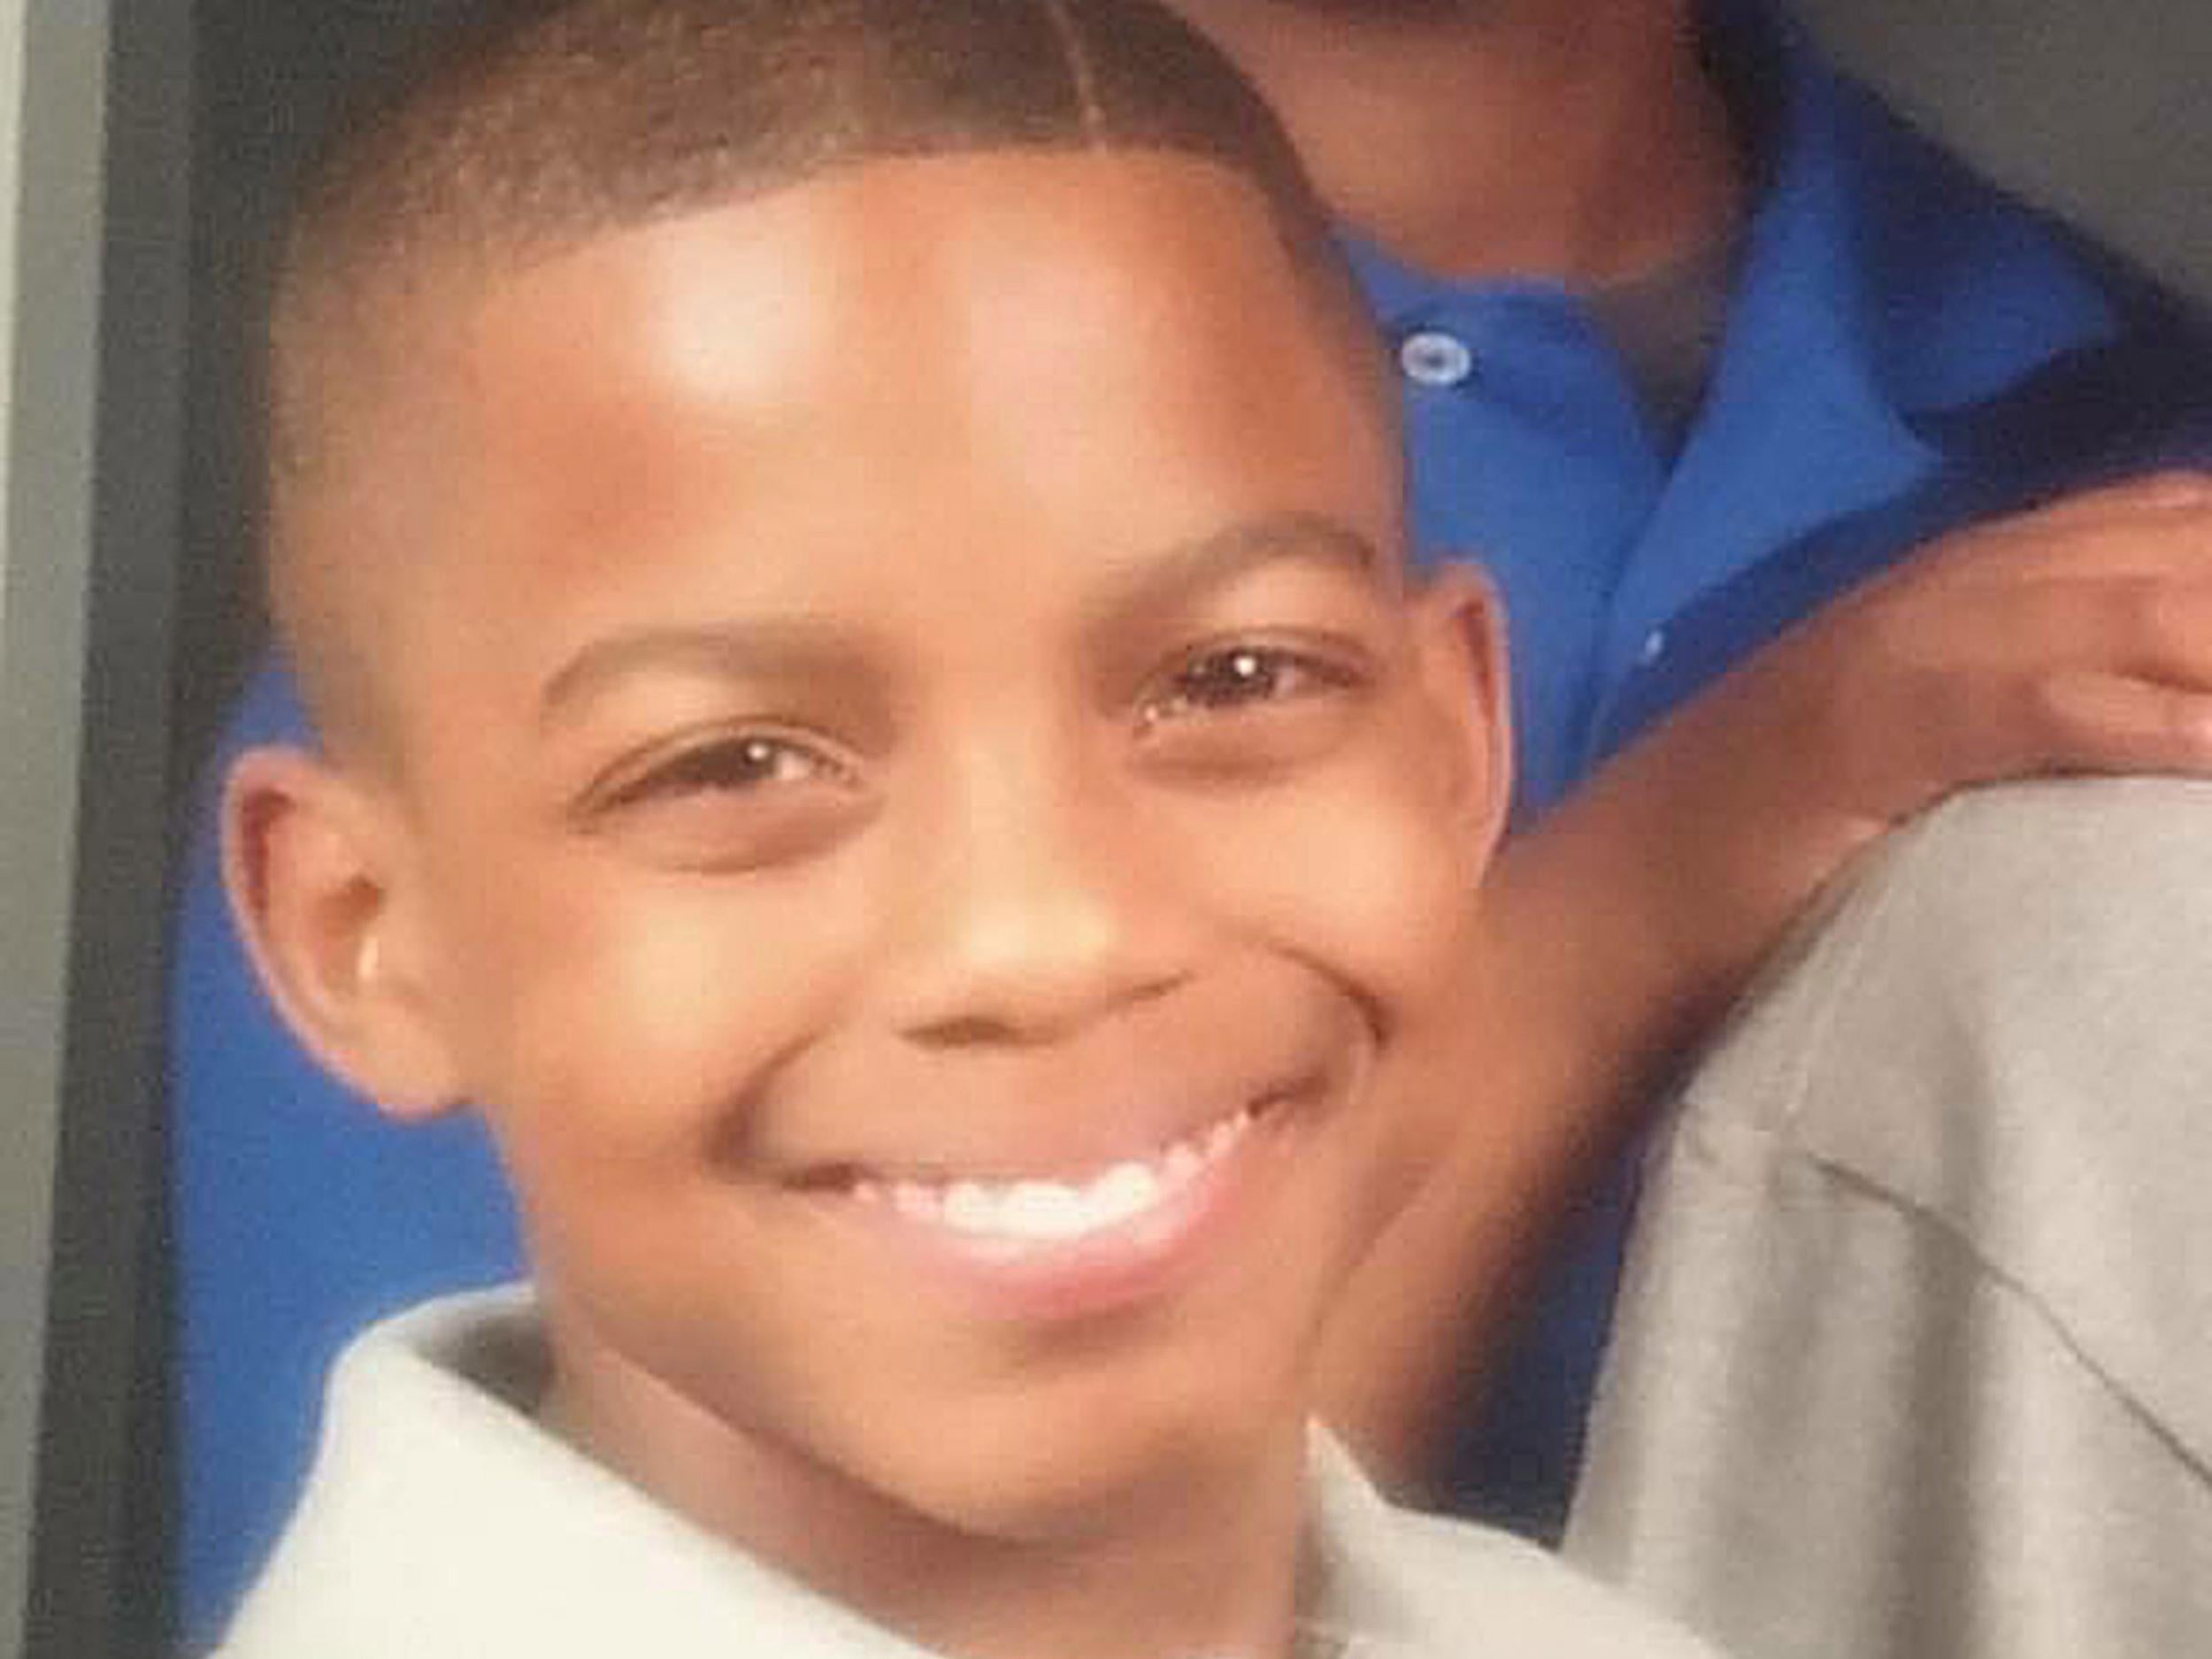 Jordan Edwards Texas Police Officer Fired For Shooting And Killing Black Teenager The